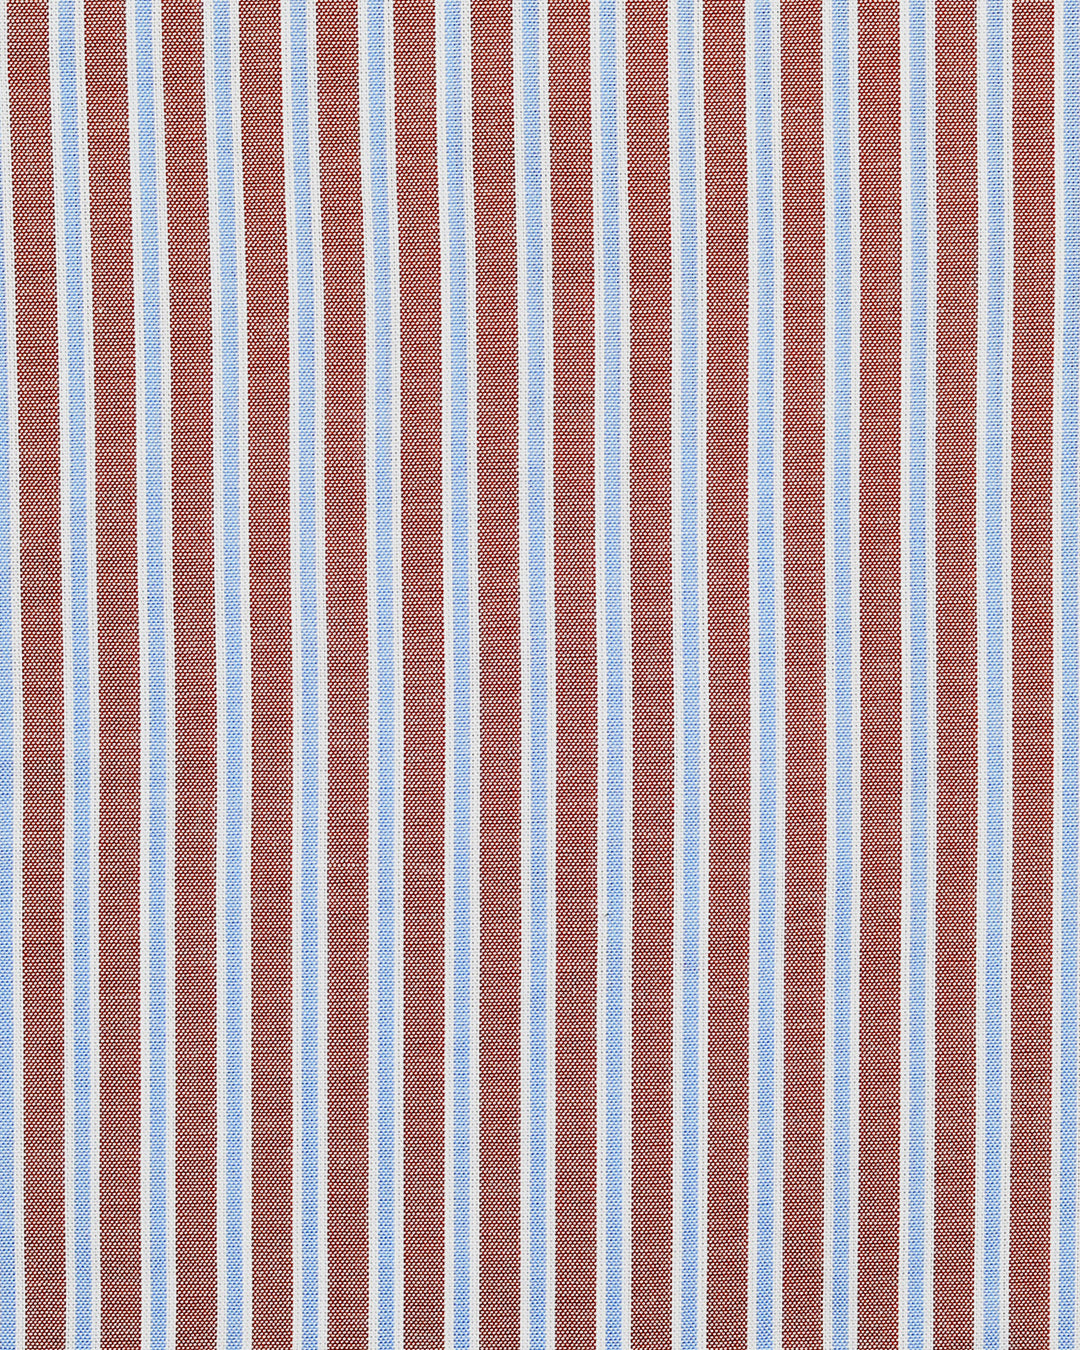 Close up of the custom oxford shirt for men by Luxire with blue white and rust stripes